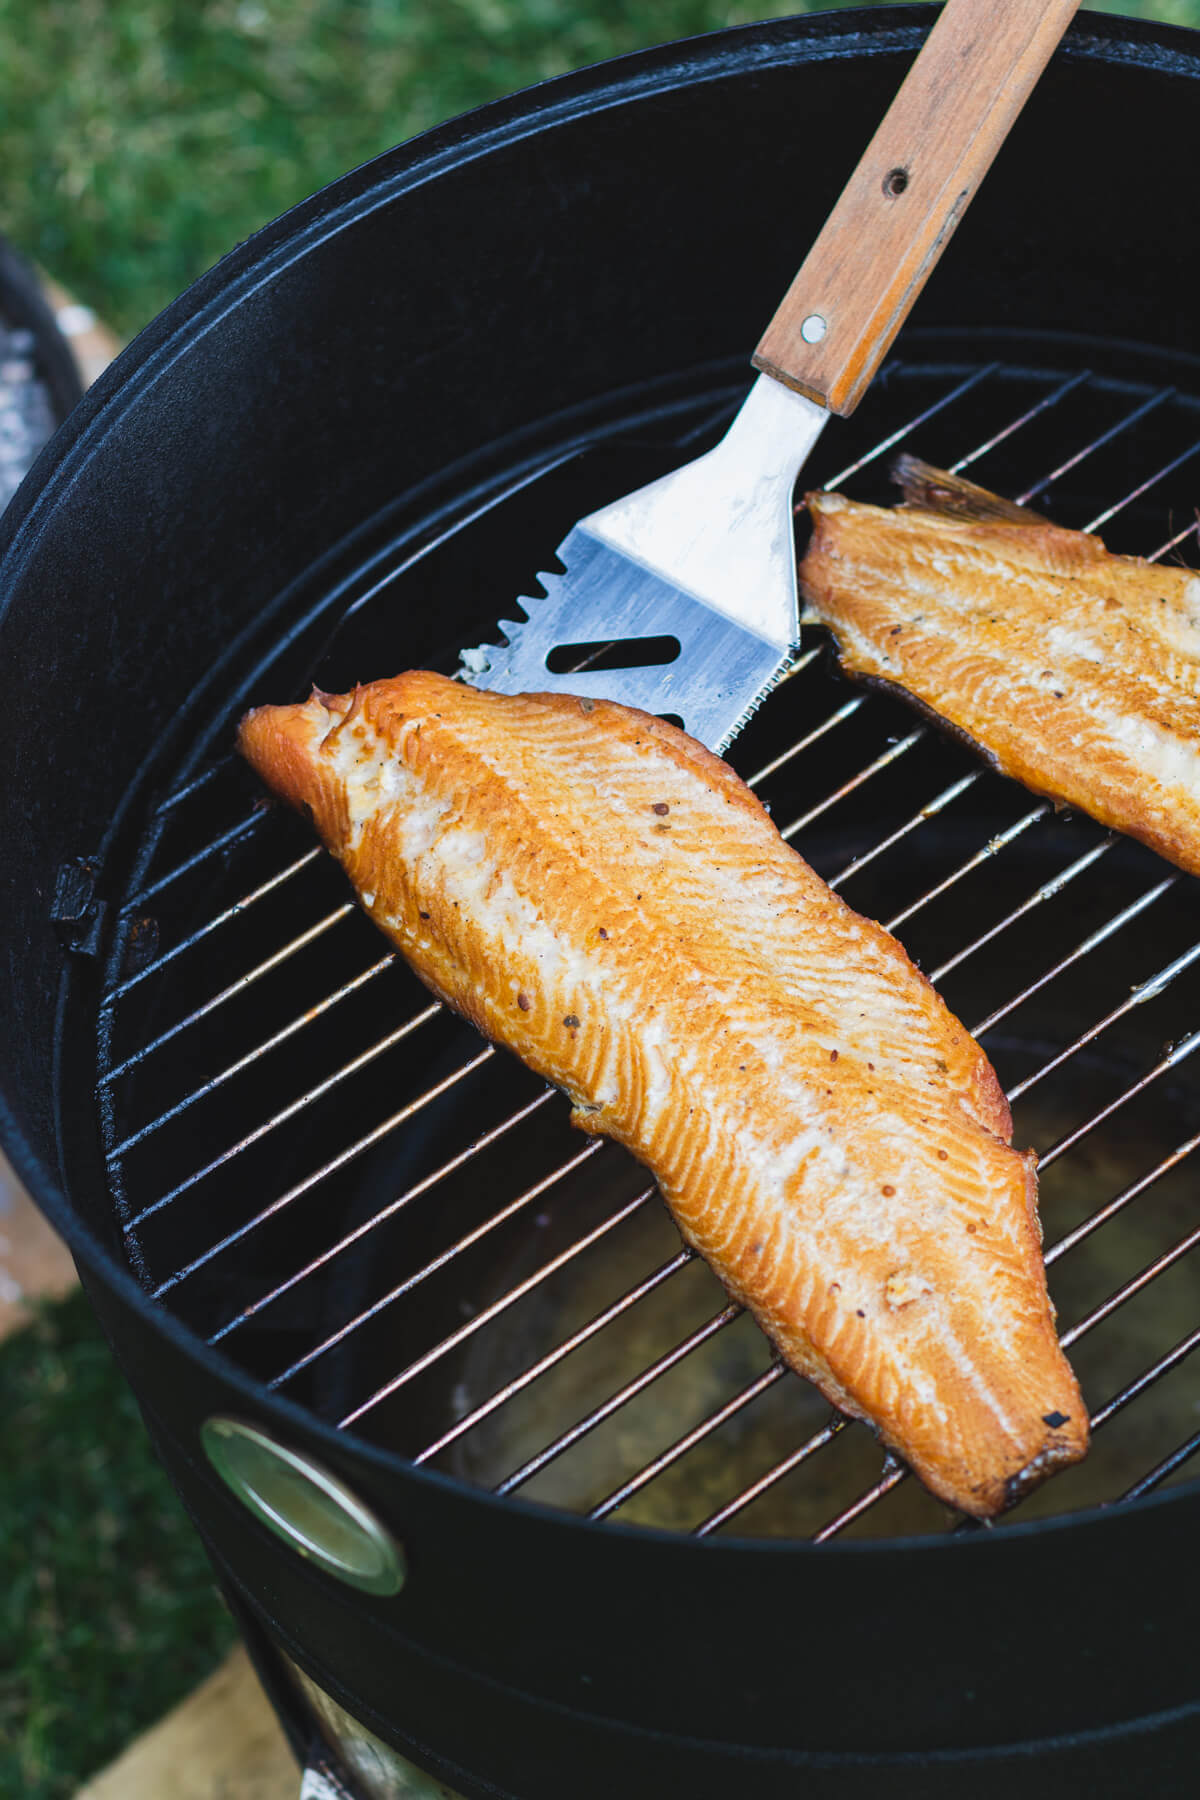 Two smoked trout fillets on a smoker grill.